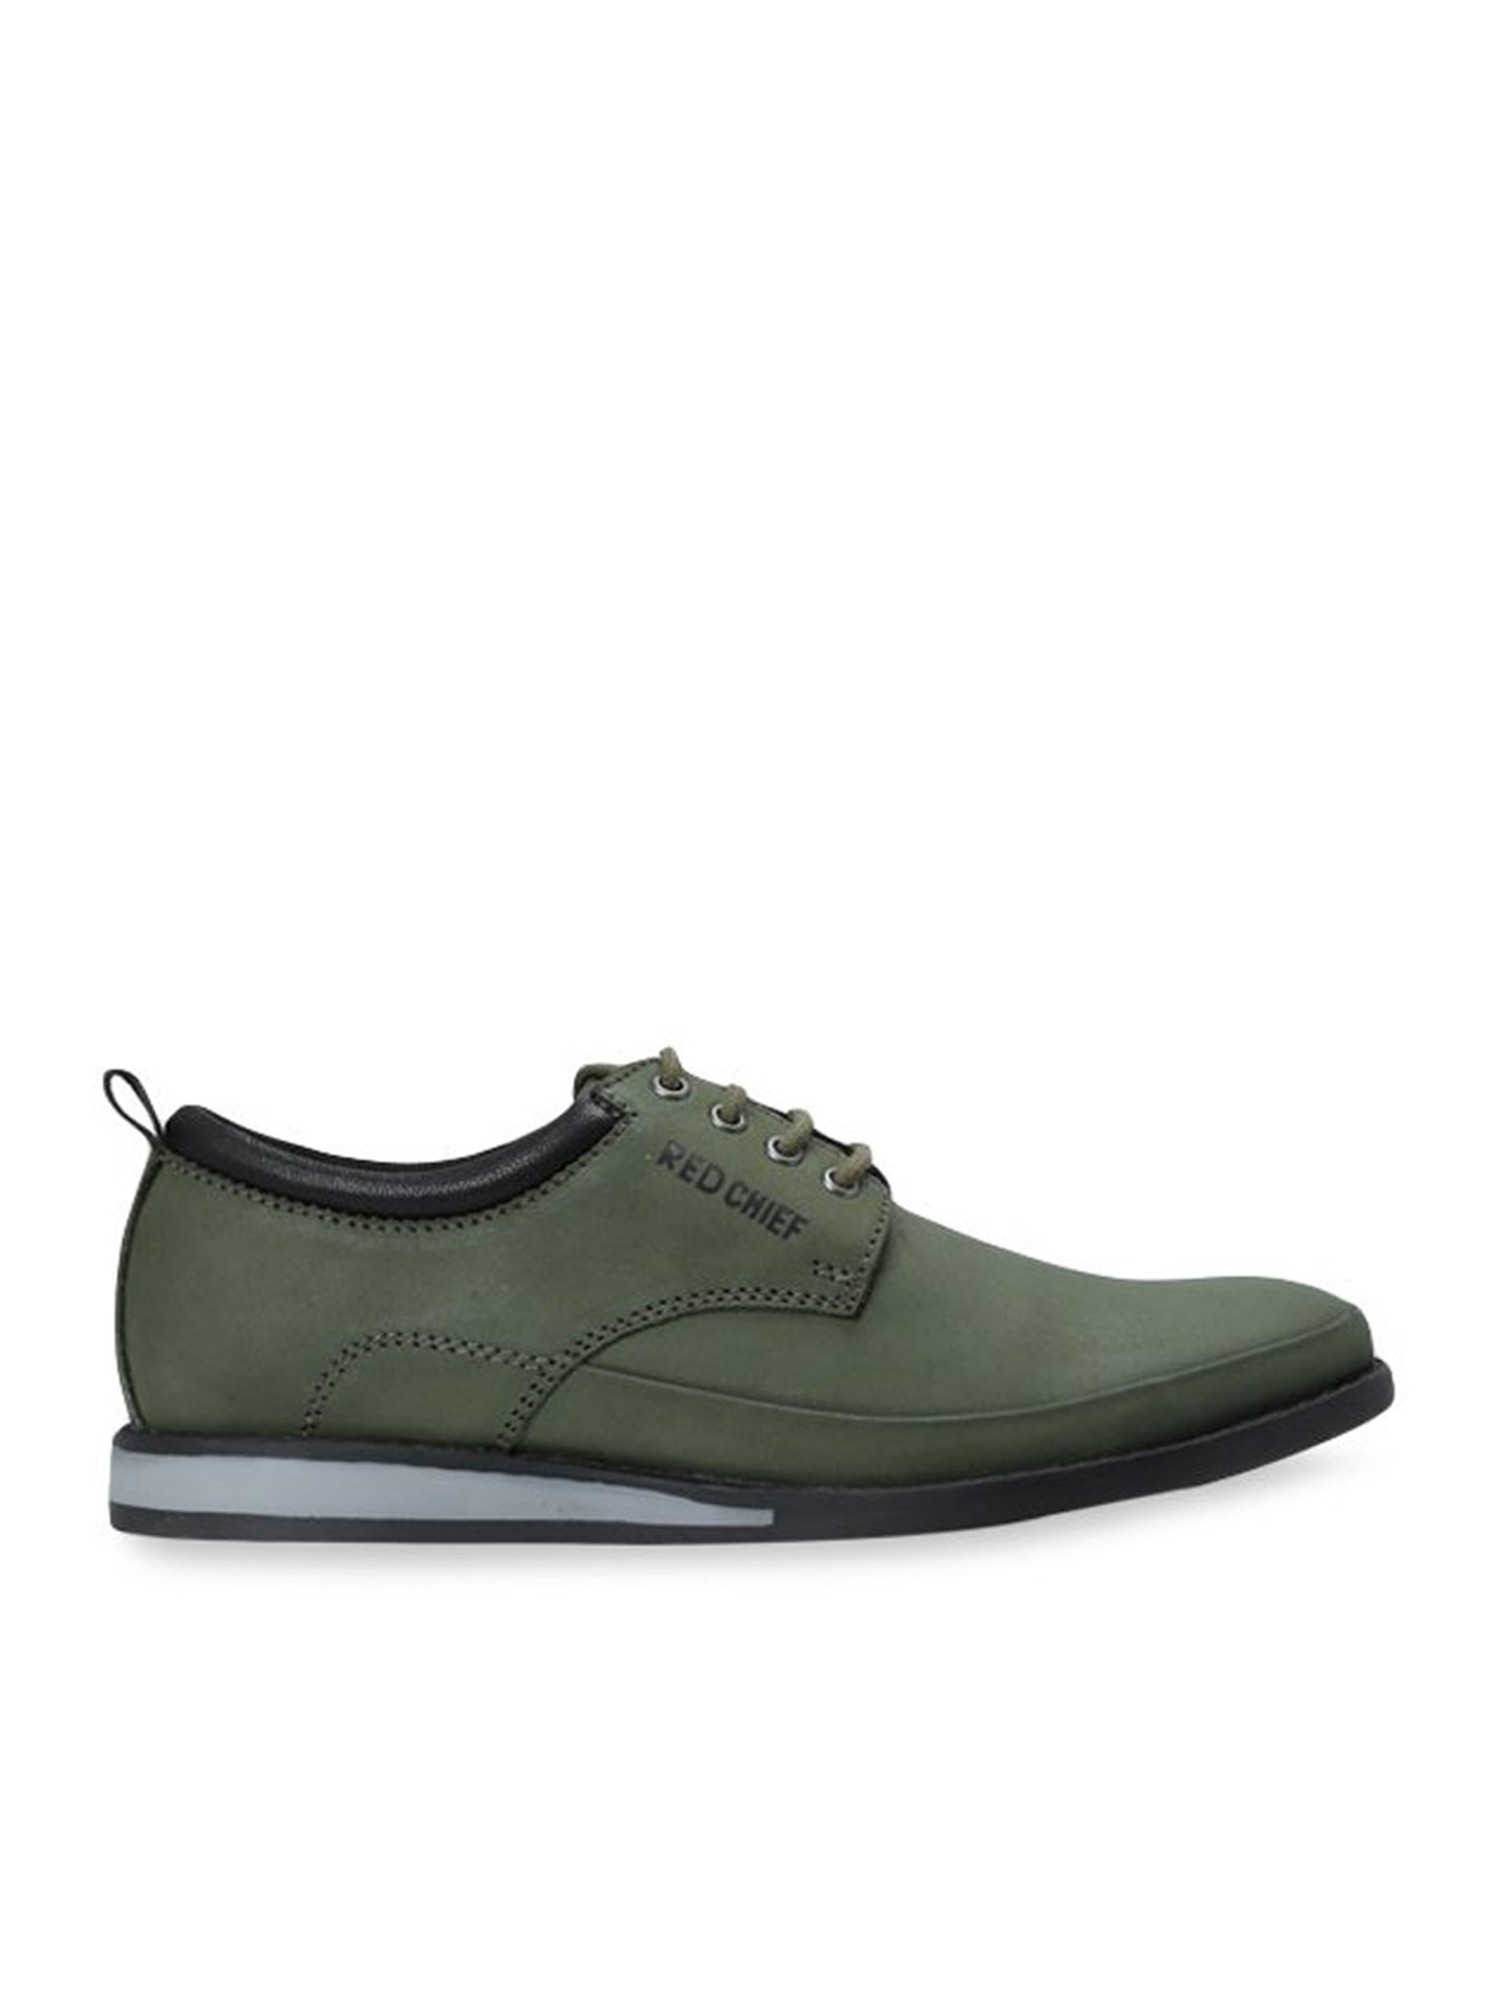 REFOAM Men's Olive Textile Lace Up Casual Sneakers – Refoam